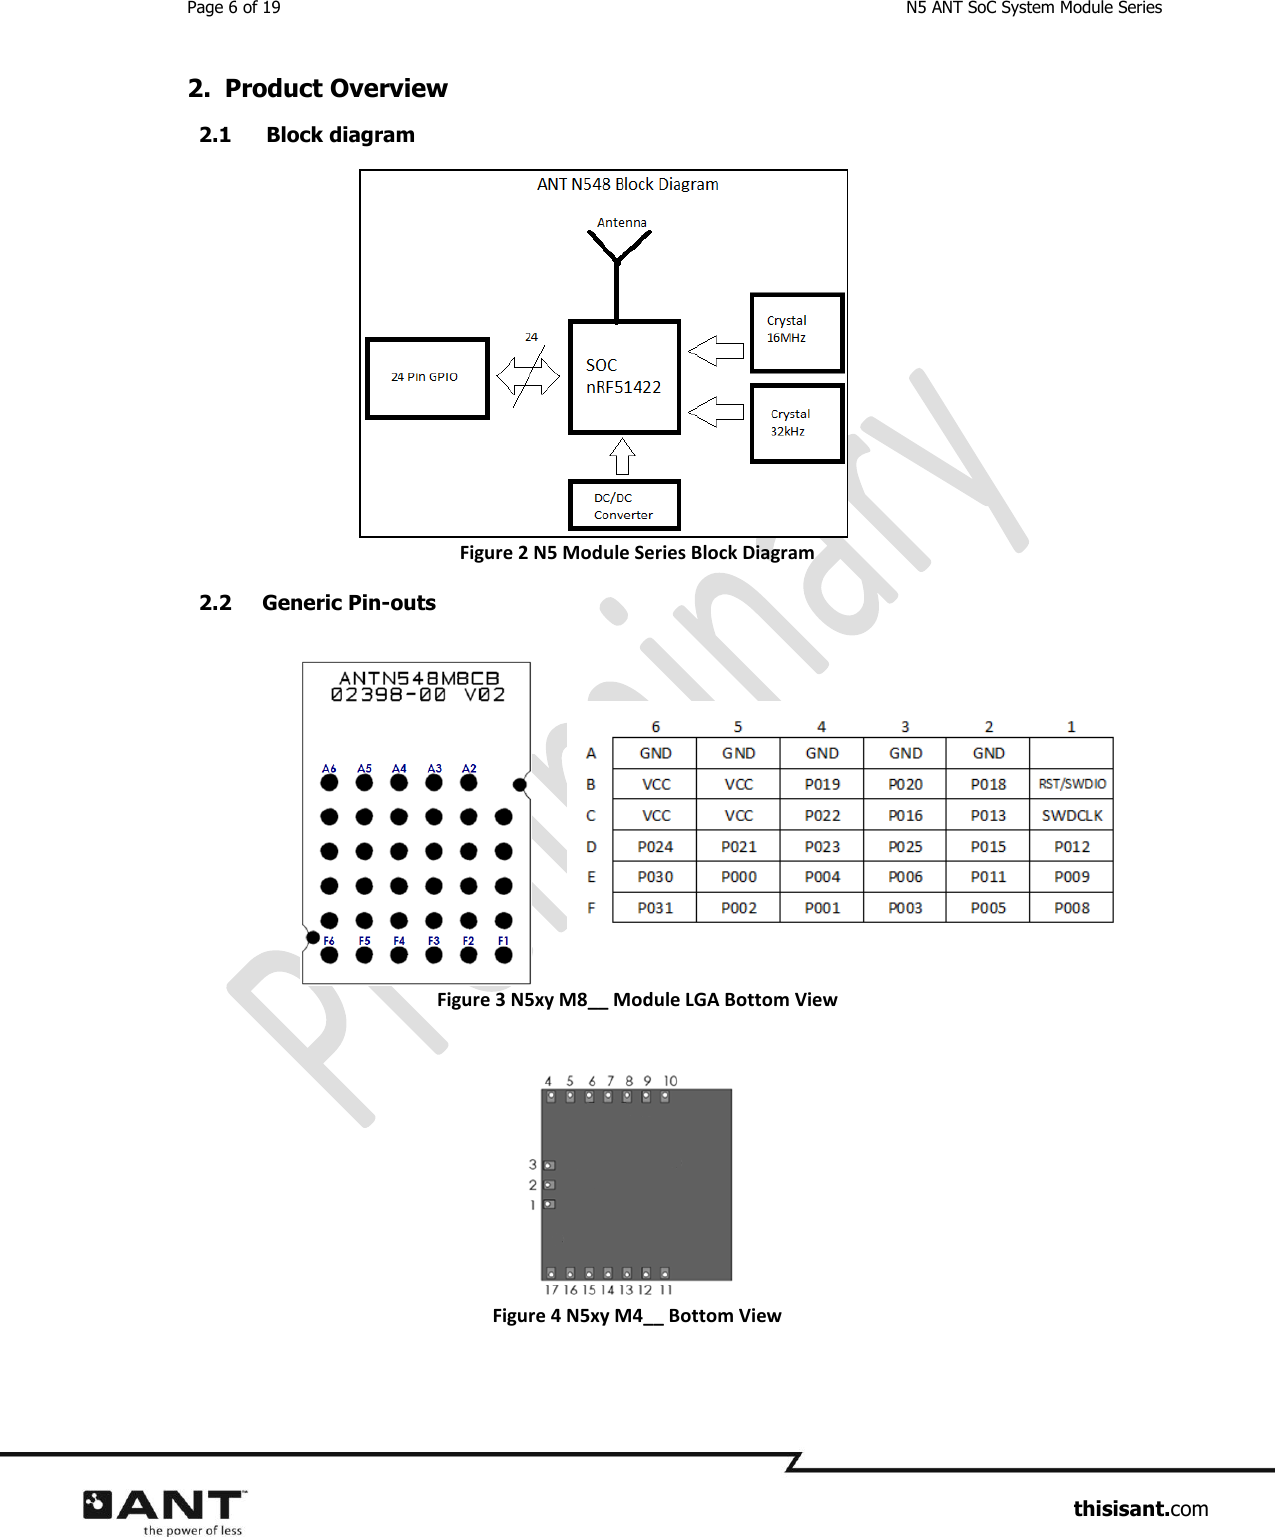 Page 6 of 19  N5 ANT SoC System Module Series                     thisisant.com 2. Product Overview 2.1 Block diagram Figure 2 N5 Module Series Block Diagram 2.2 Generic Pin-outs Figure 3 N5xy M8__ Module LGA Bottom View  Figure 4 N5xy M4__ Bottom View  